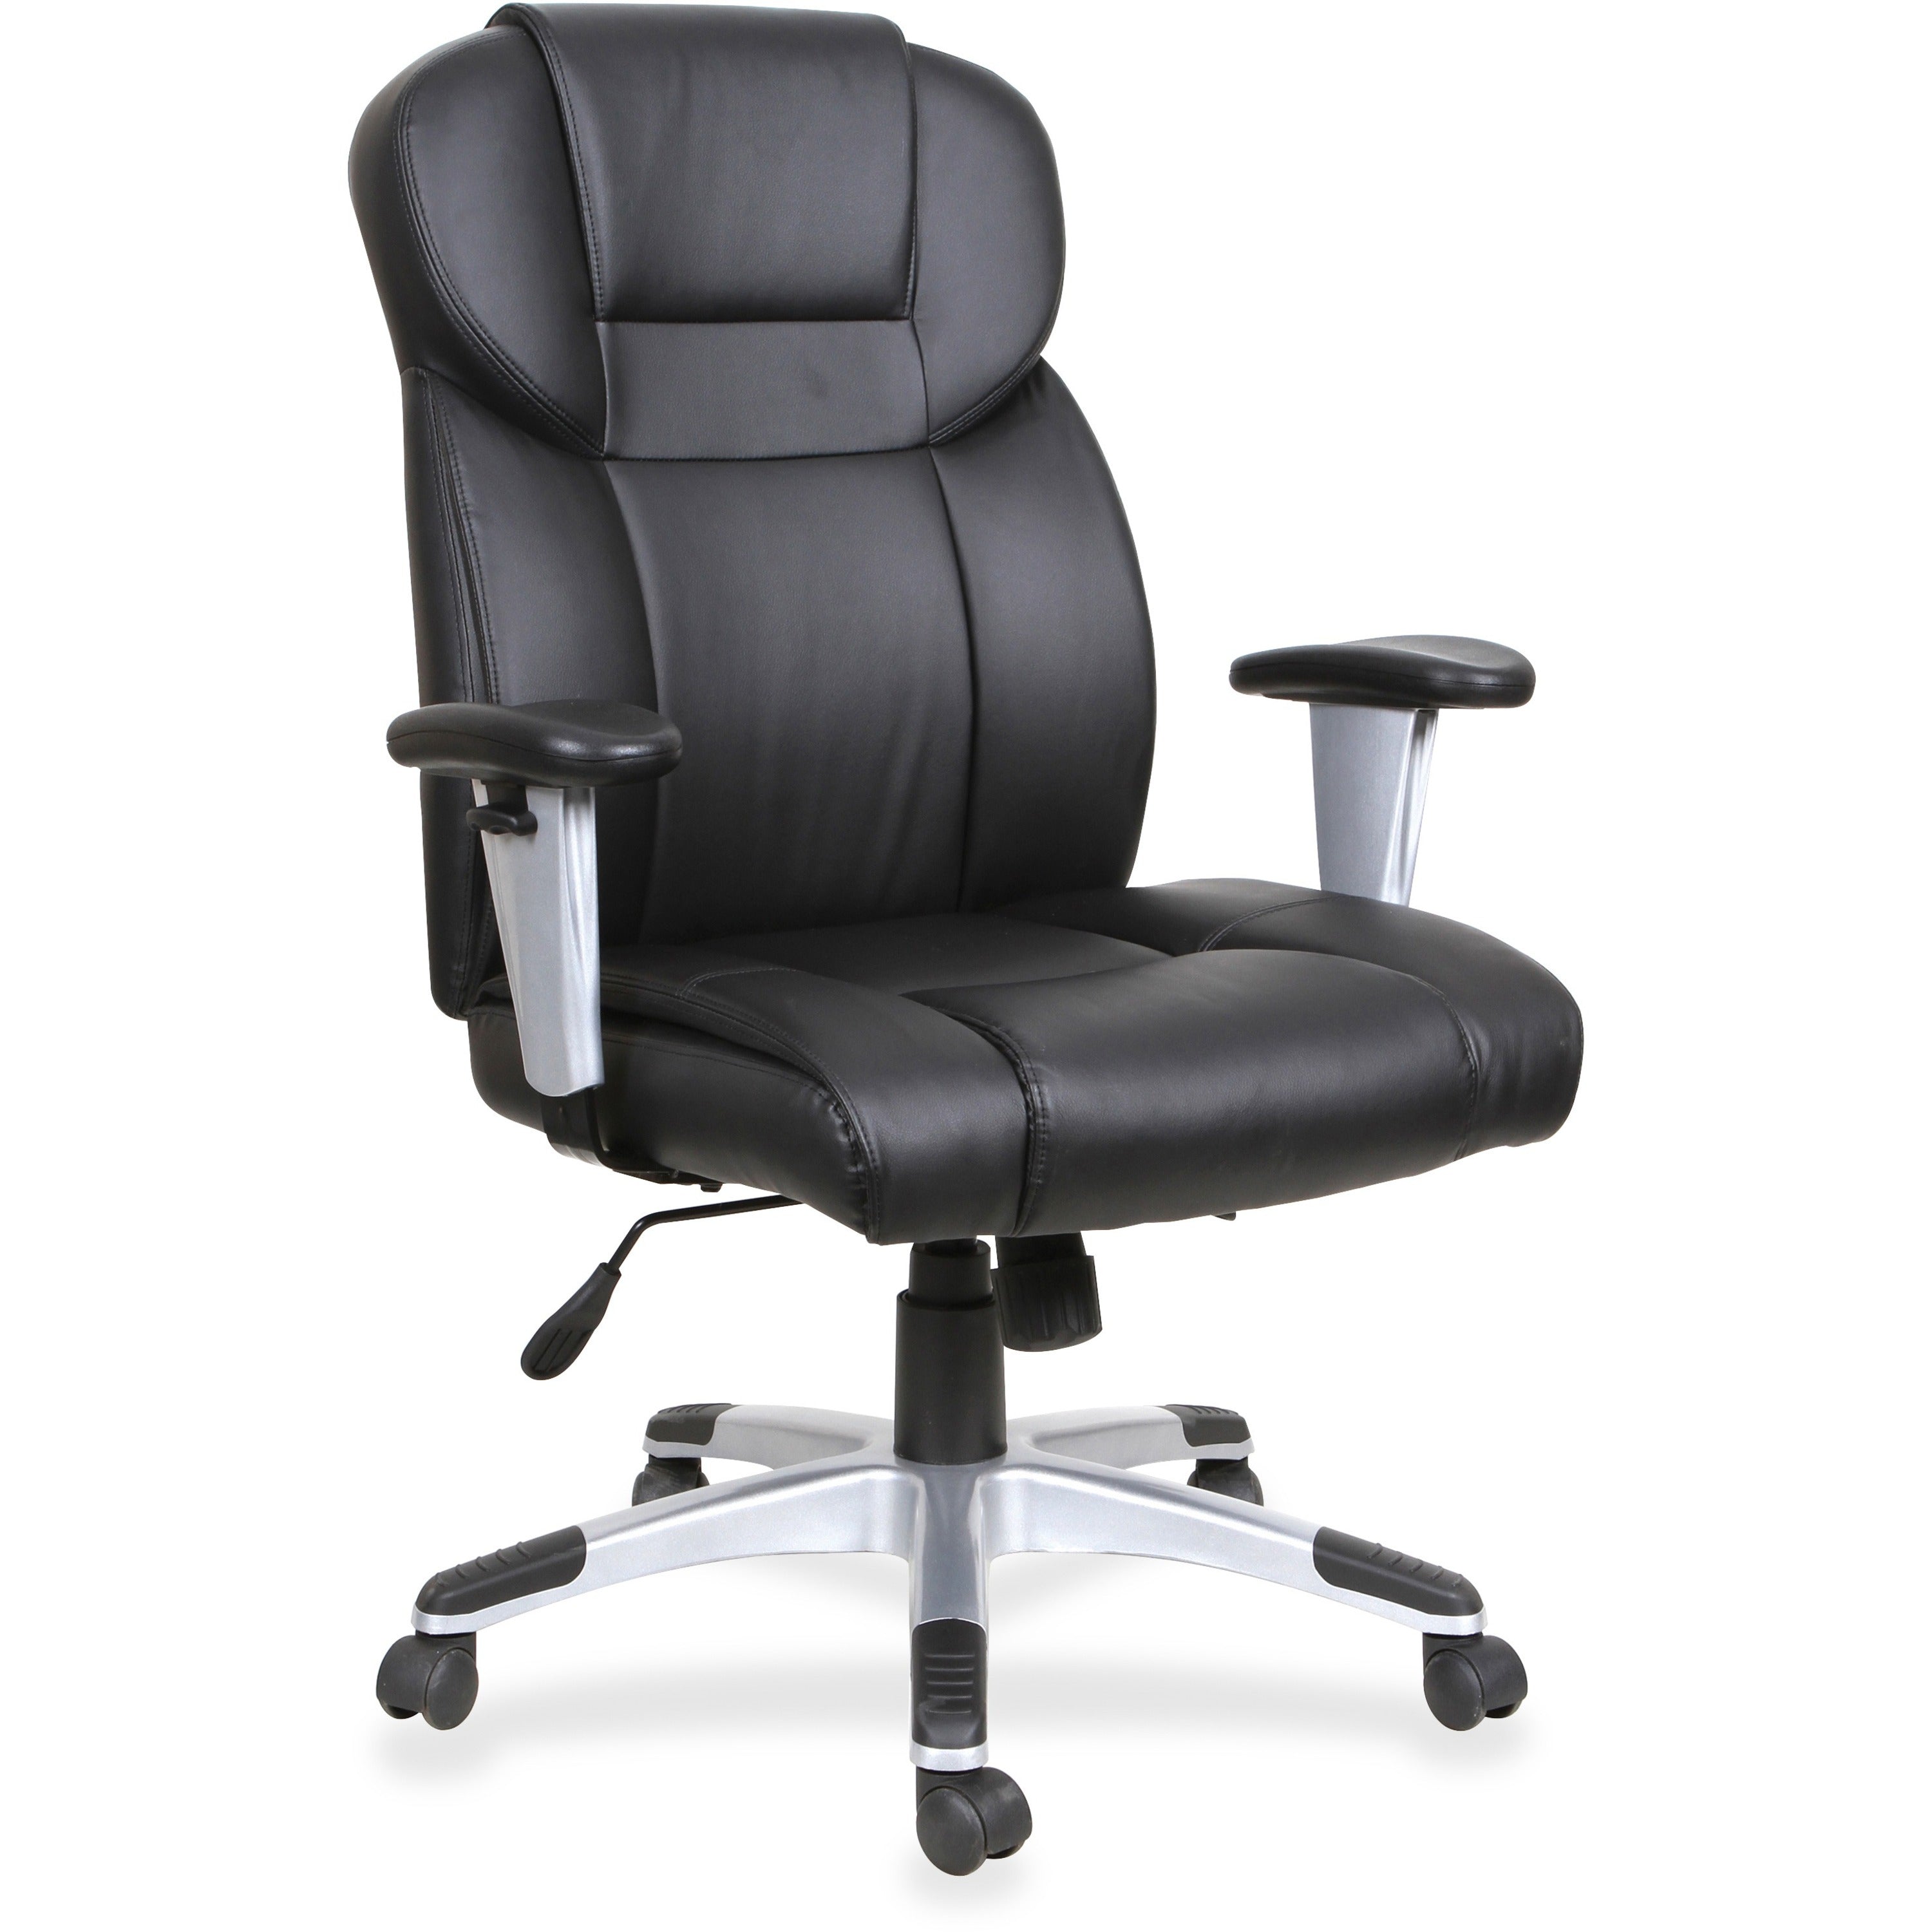 lorell-executive-high-back-chair-bonded-leather-seat-bonded-leather-back-high-back-black-1-each_llr83308 - 1